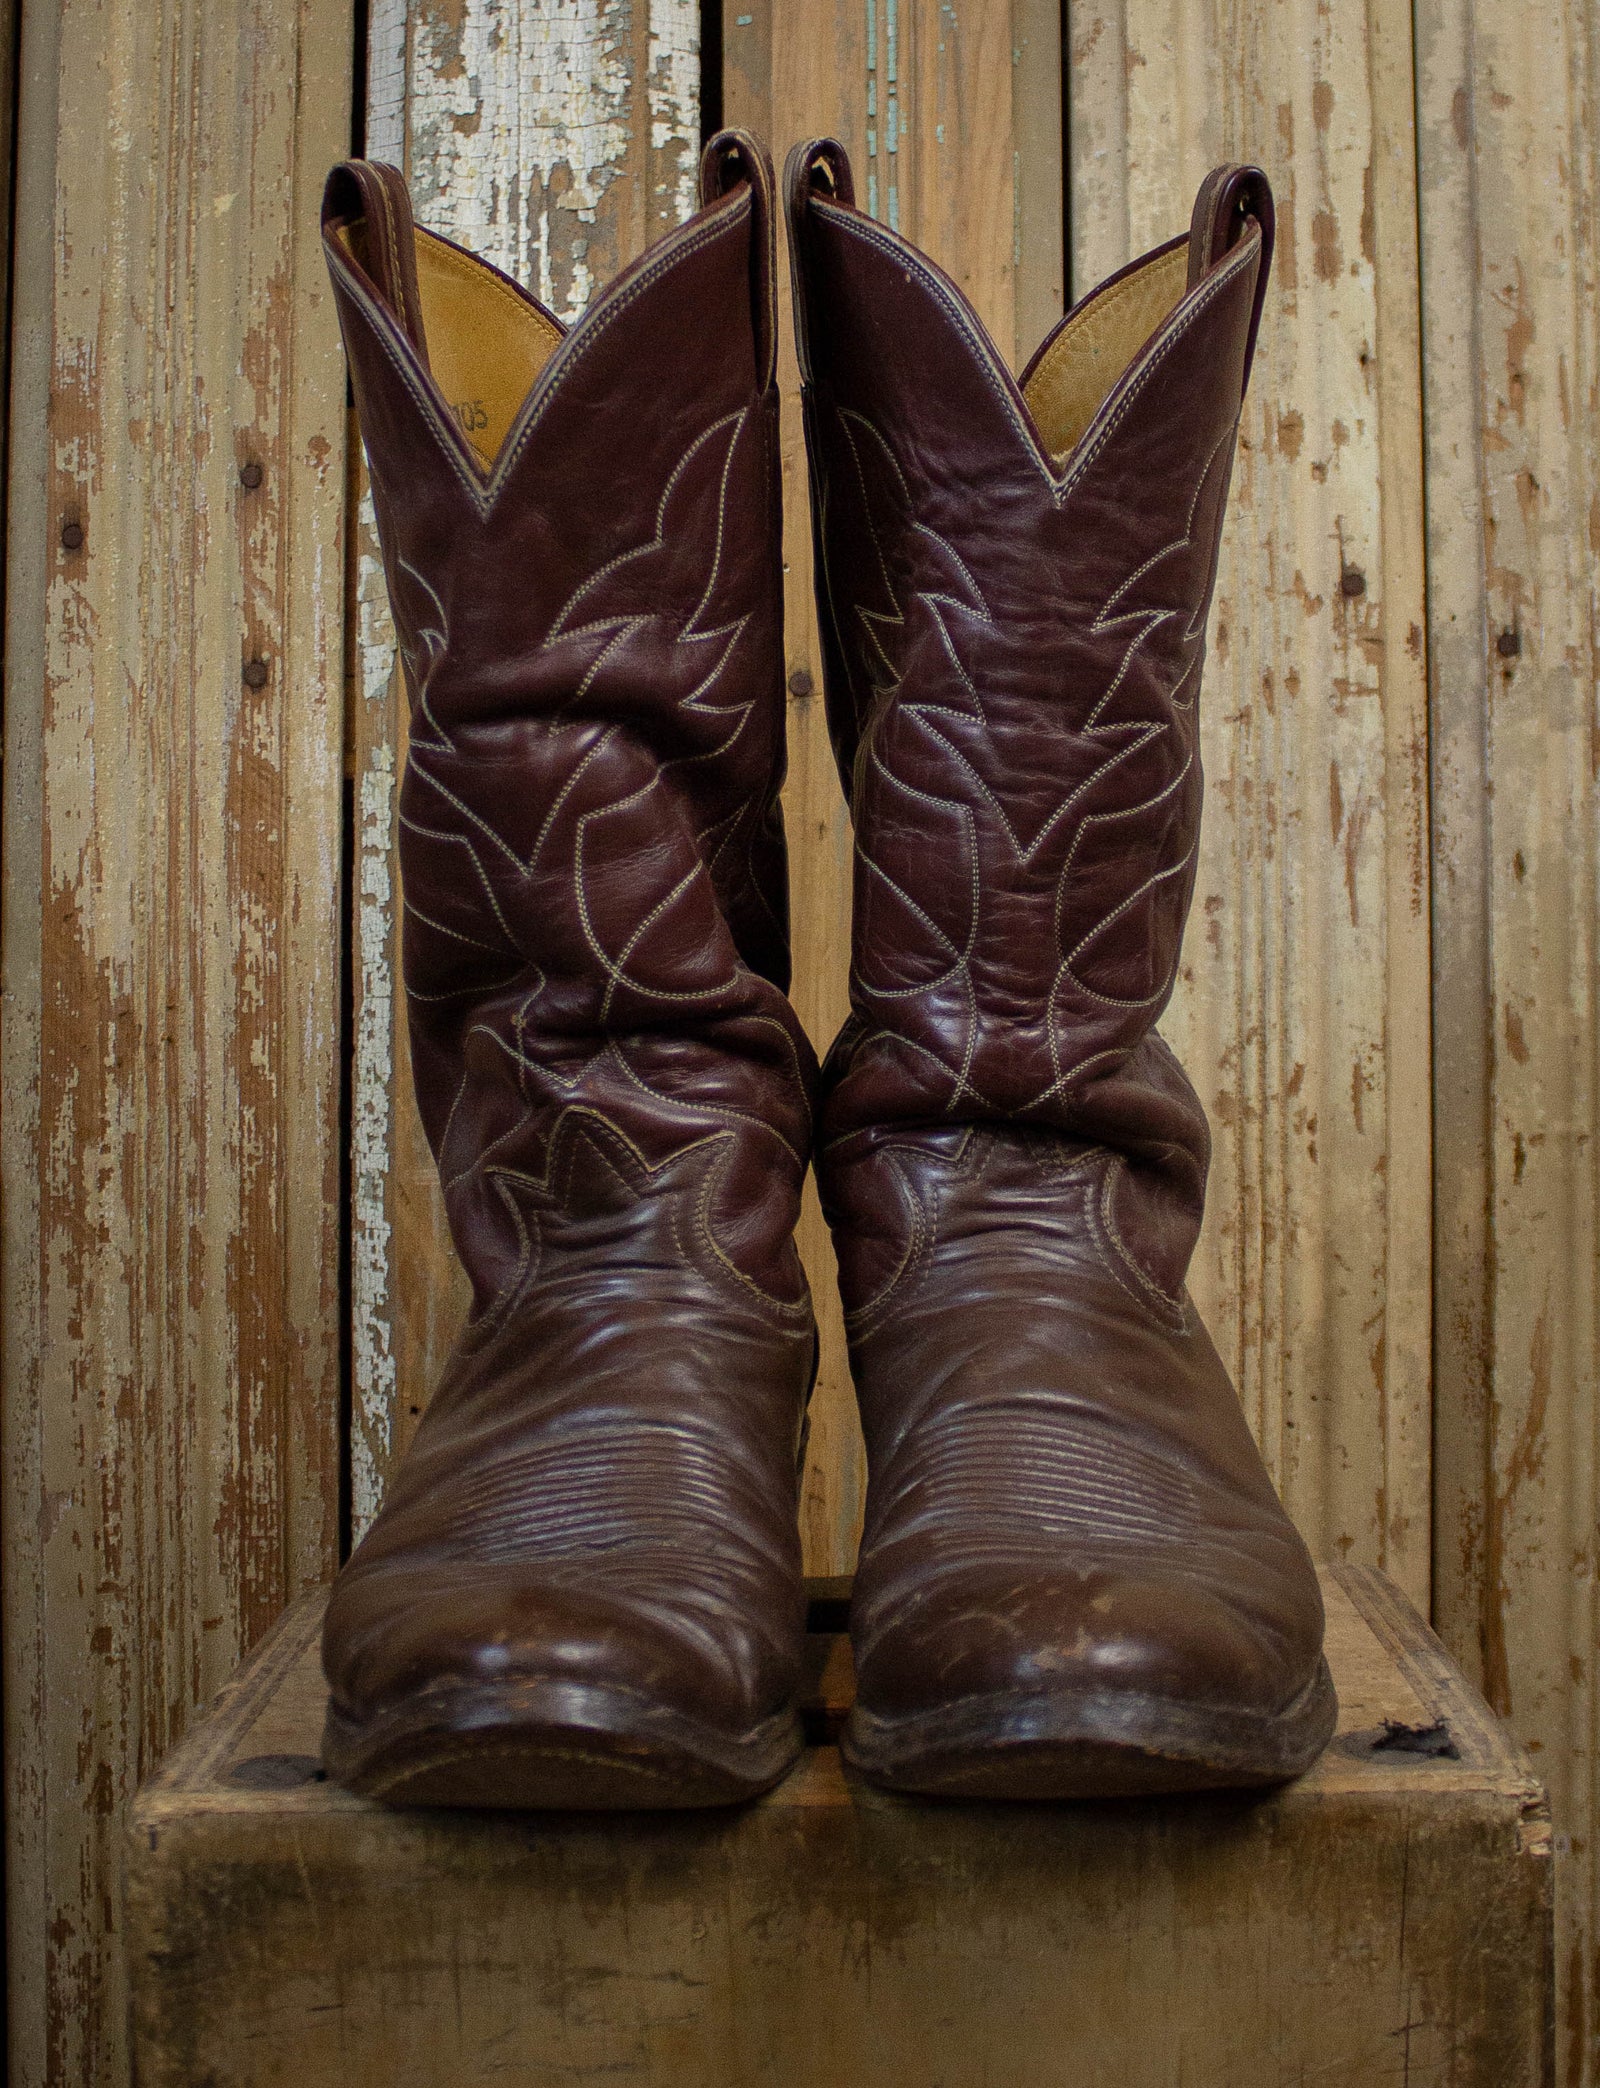 Used Western Boots with 10 top, red bottoms with